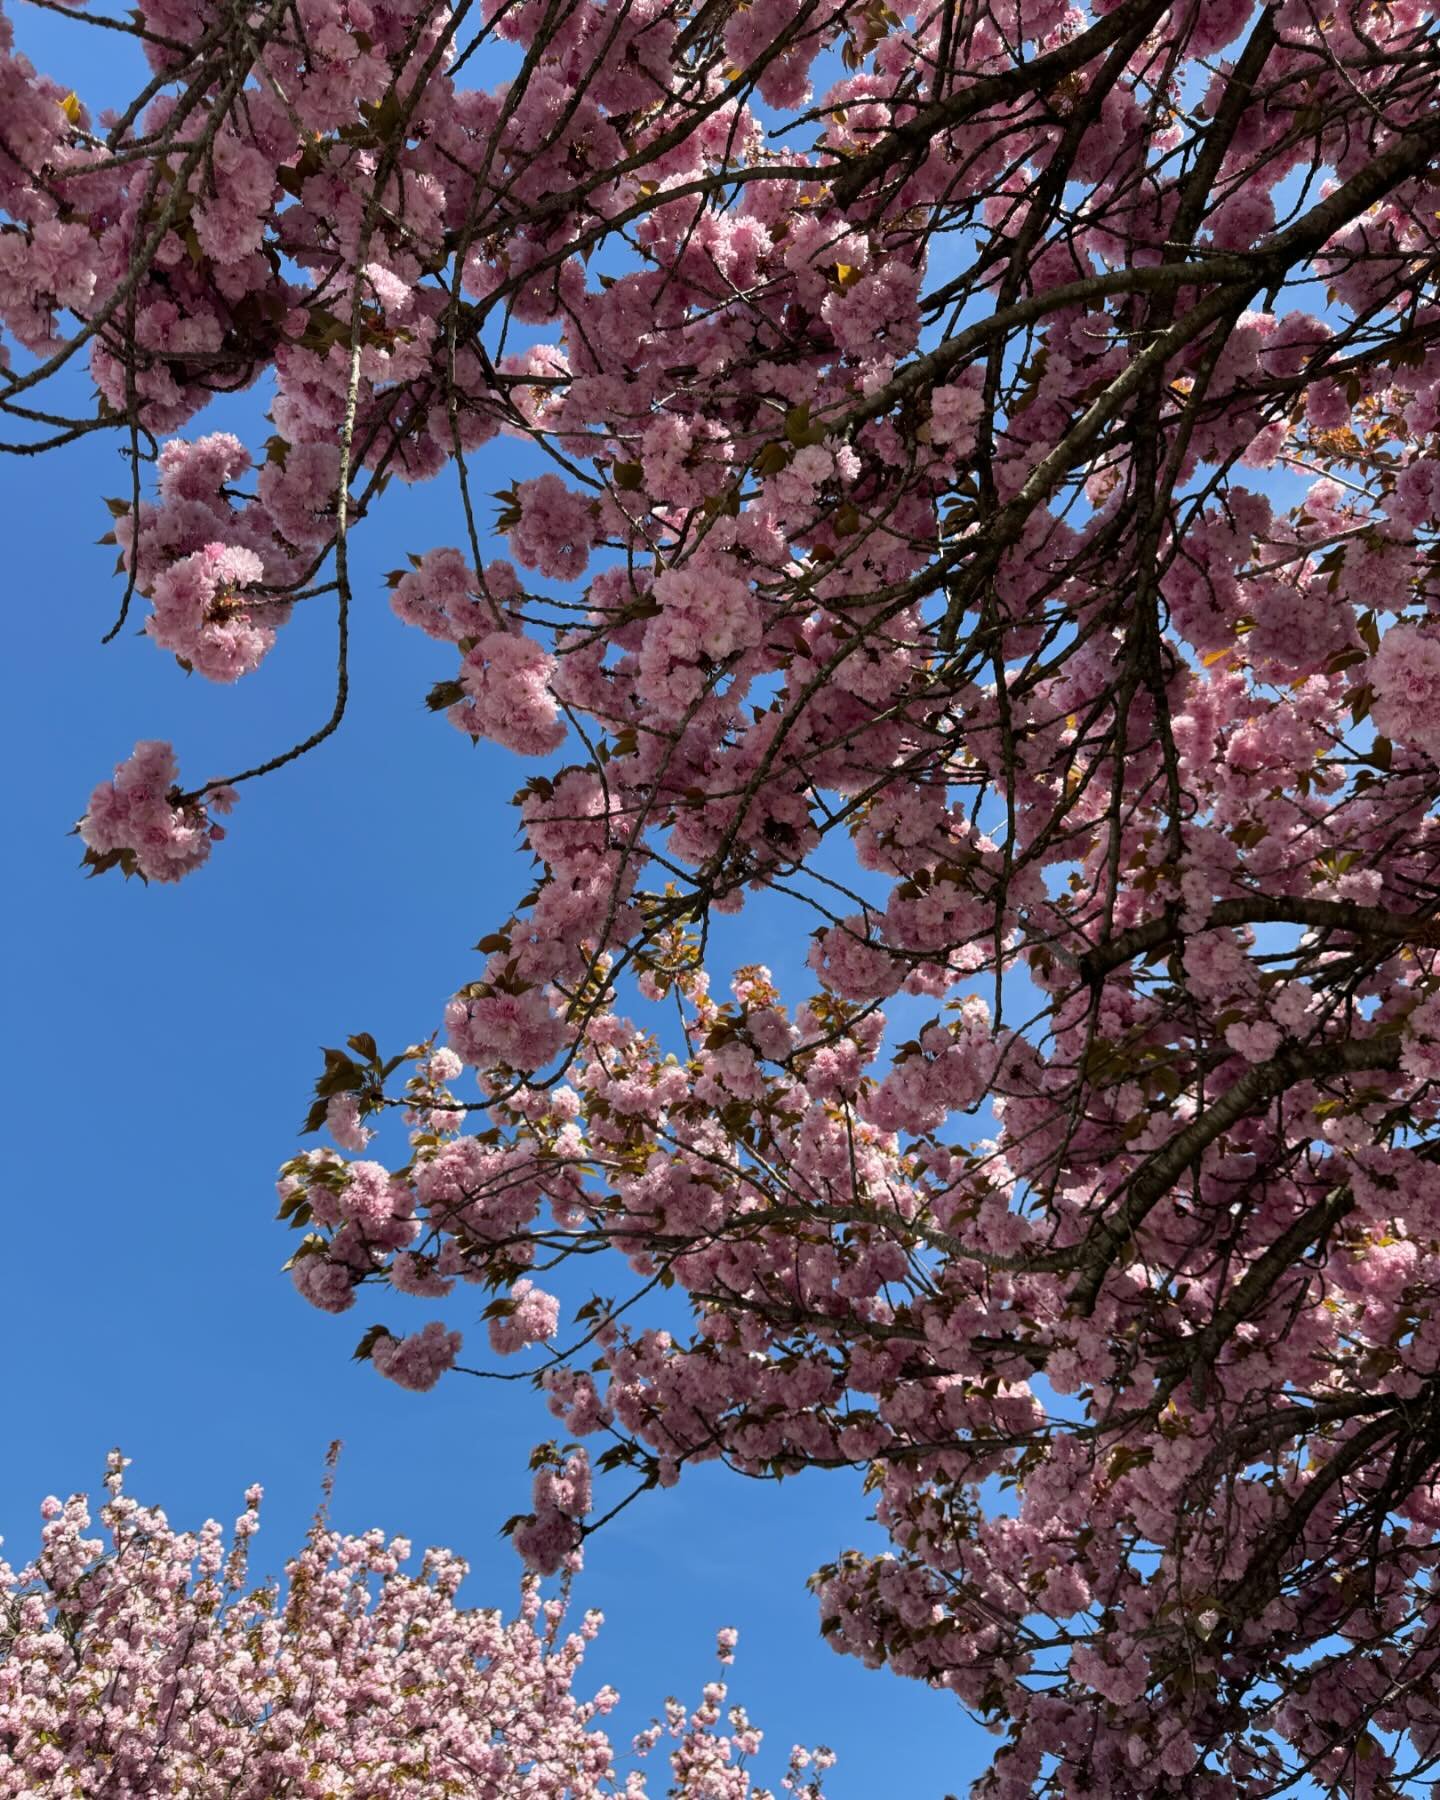 It&rsquo;s cherry blossom season! Have you had the opportunity to walk around and relish the beauty of the gorgeous pink blooms? 🌸